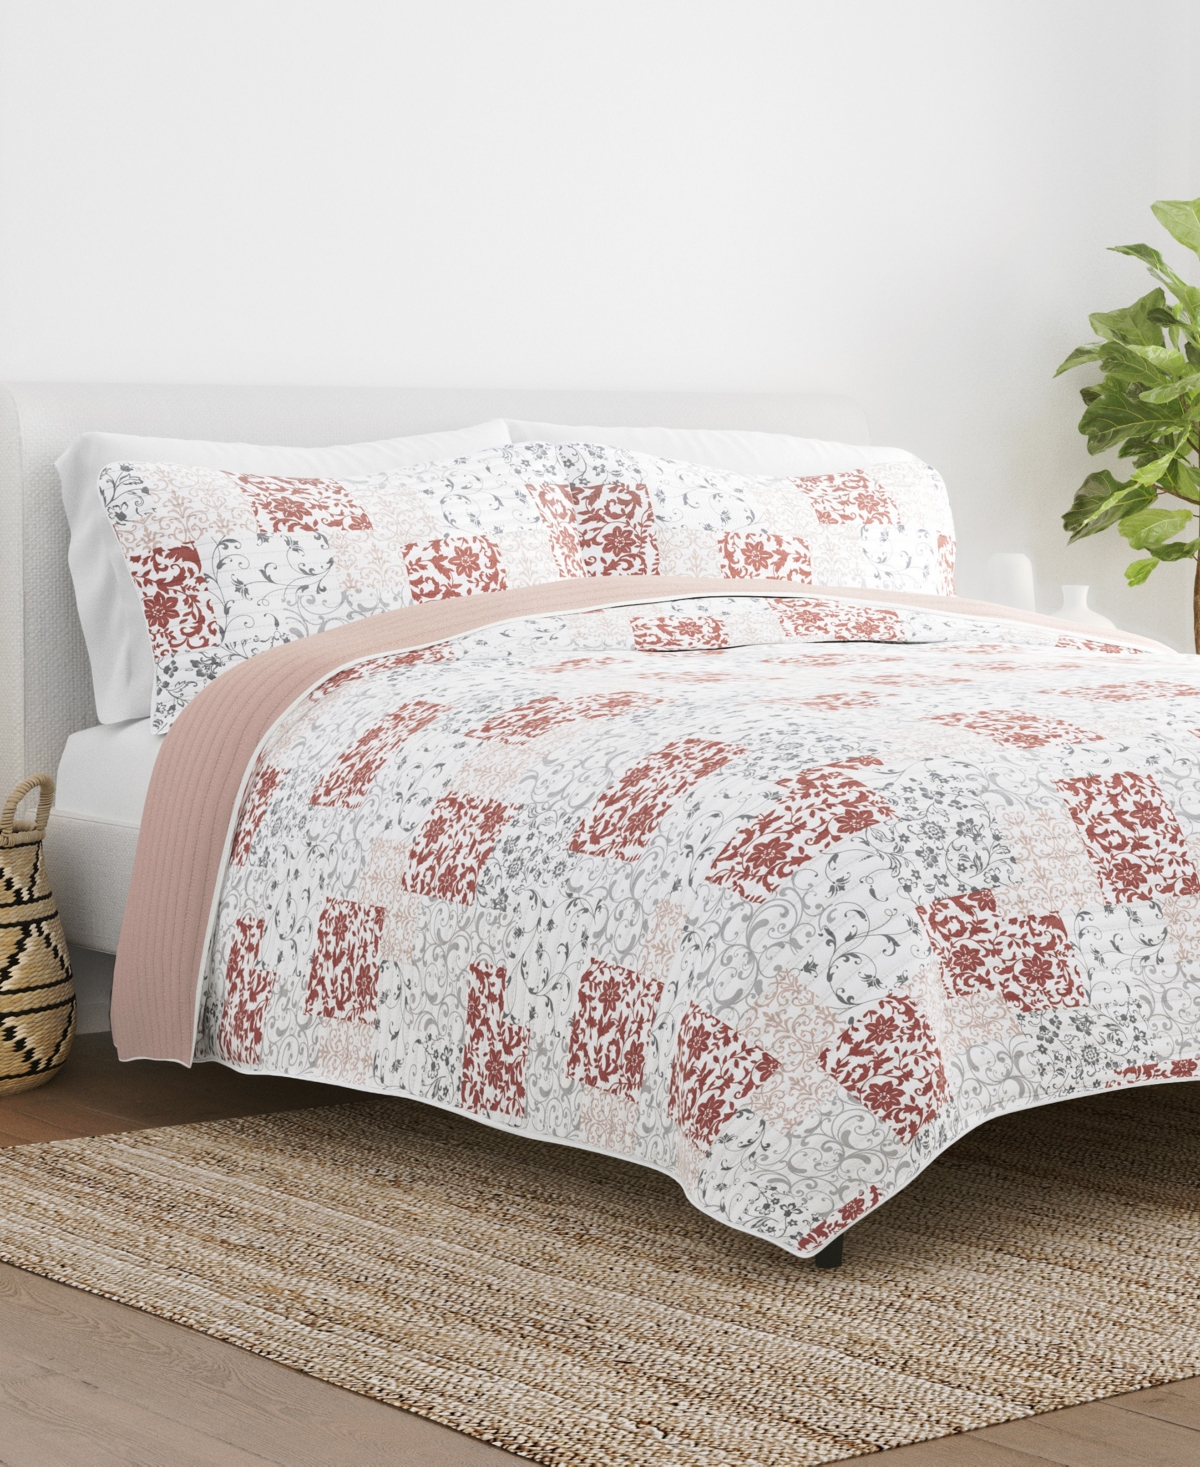 Ienjoy Home All Season 2 Piece Scrolled Patchwork Reversible Quilt Set, Twin/twin Xl In Blush